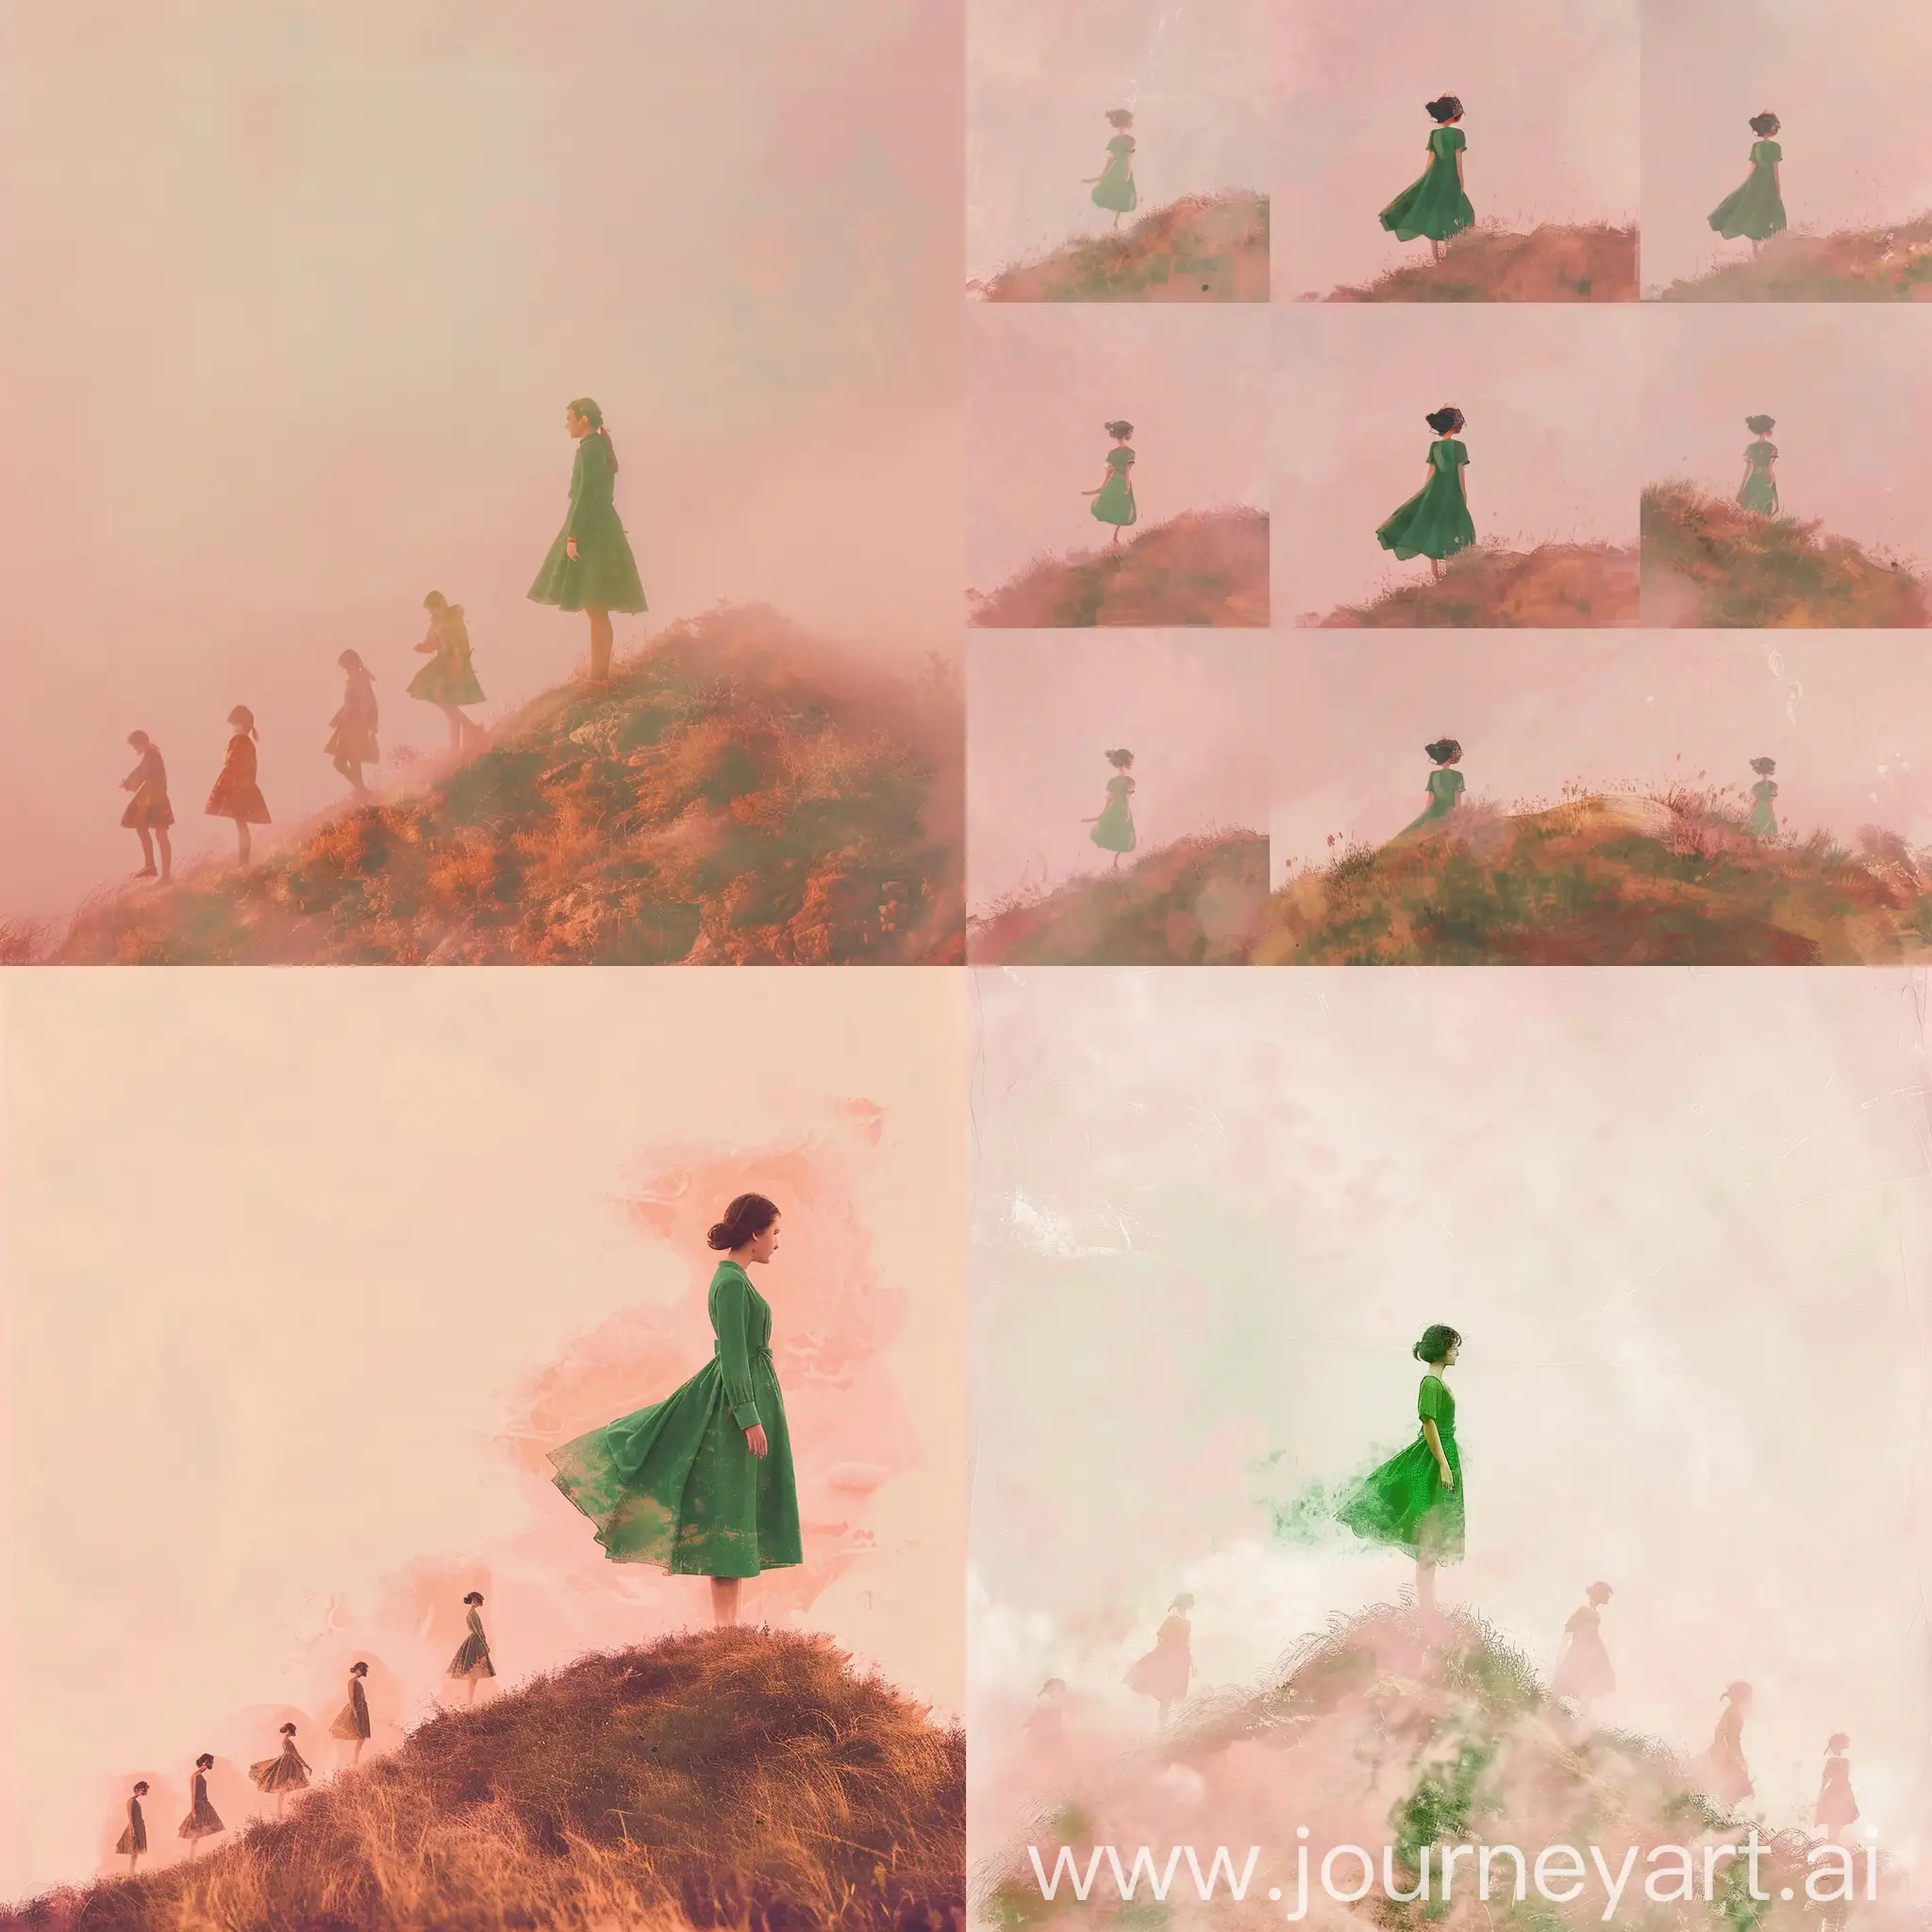 Girl-in-Green-Dress-Standing-on-Hill-Overlooking-9-Stages-of-Life-in-Pink-Haze